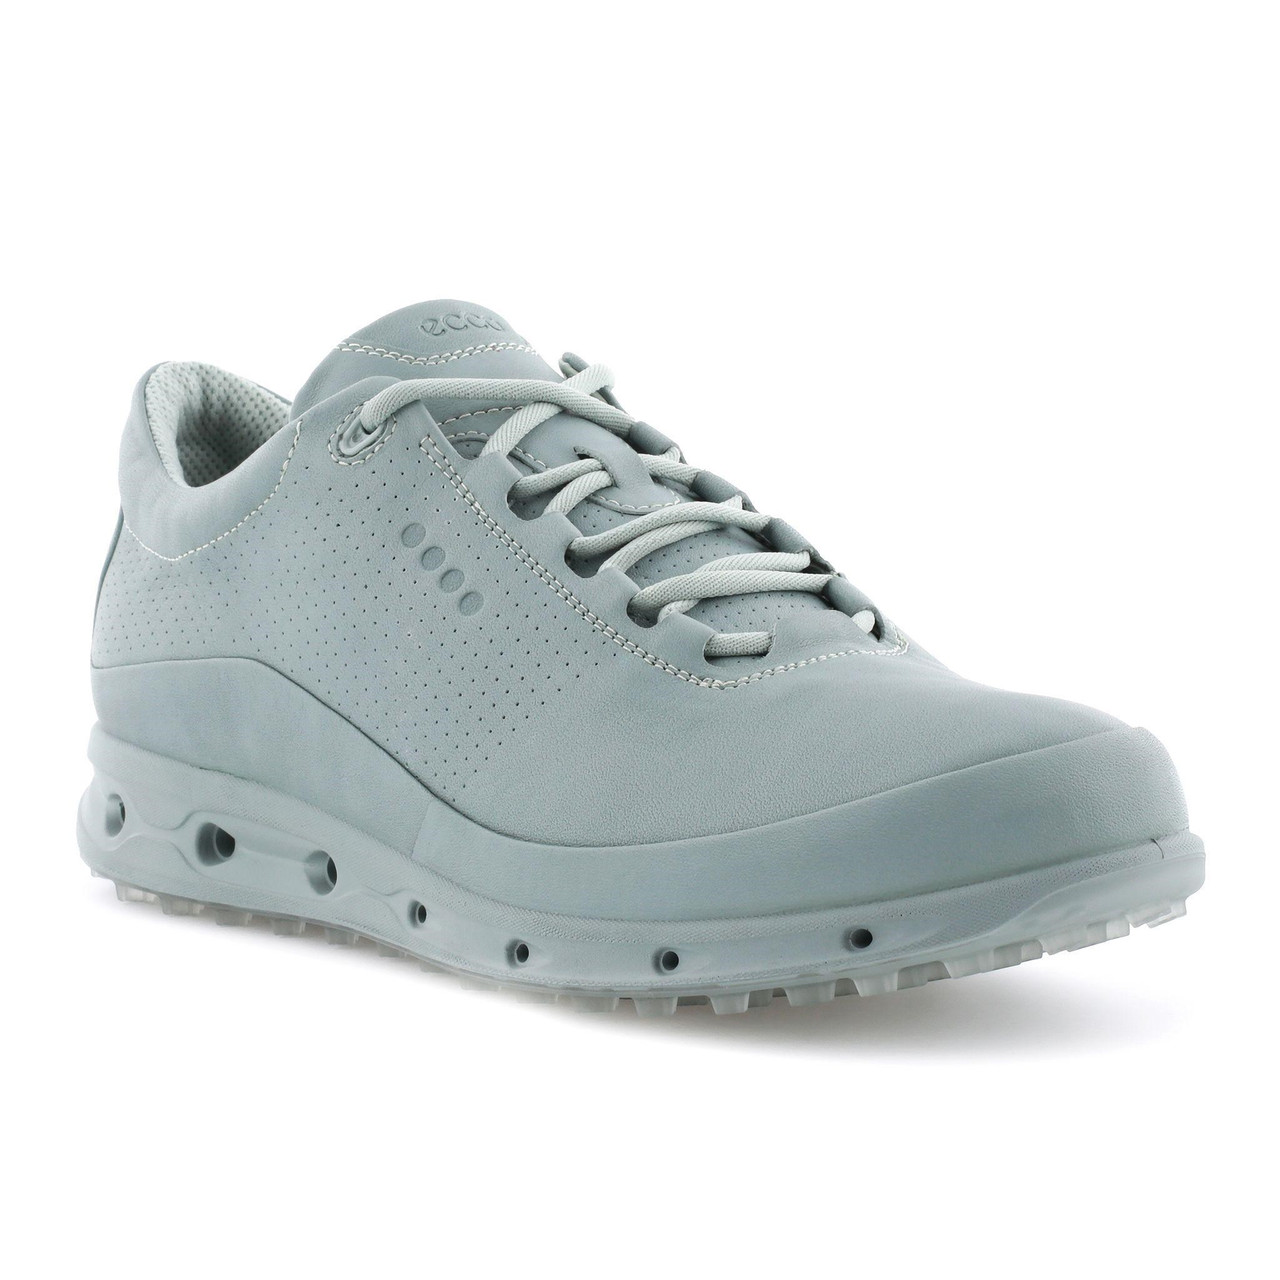 Cool Pro Golf Shoes Ice Flower Racer 